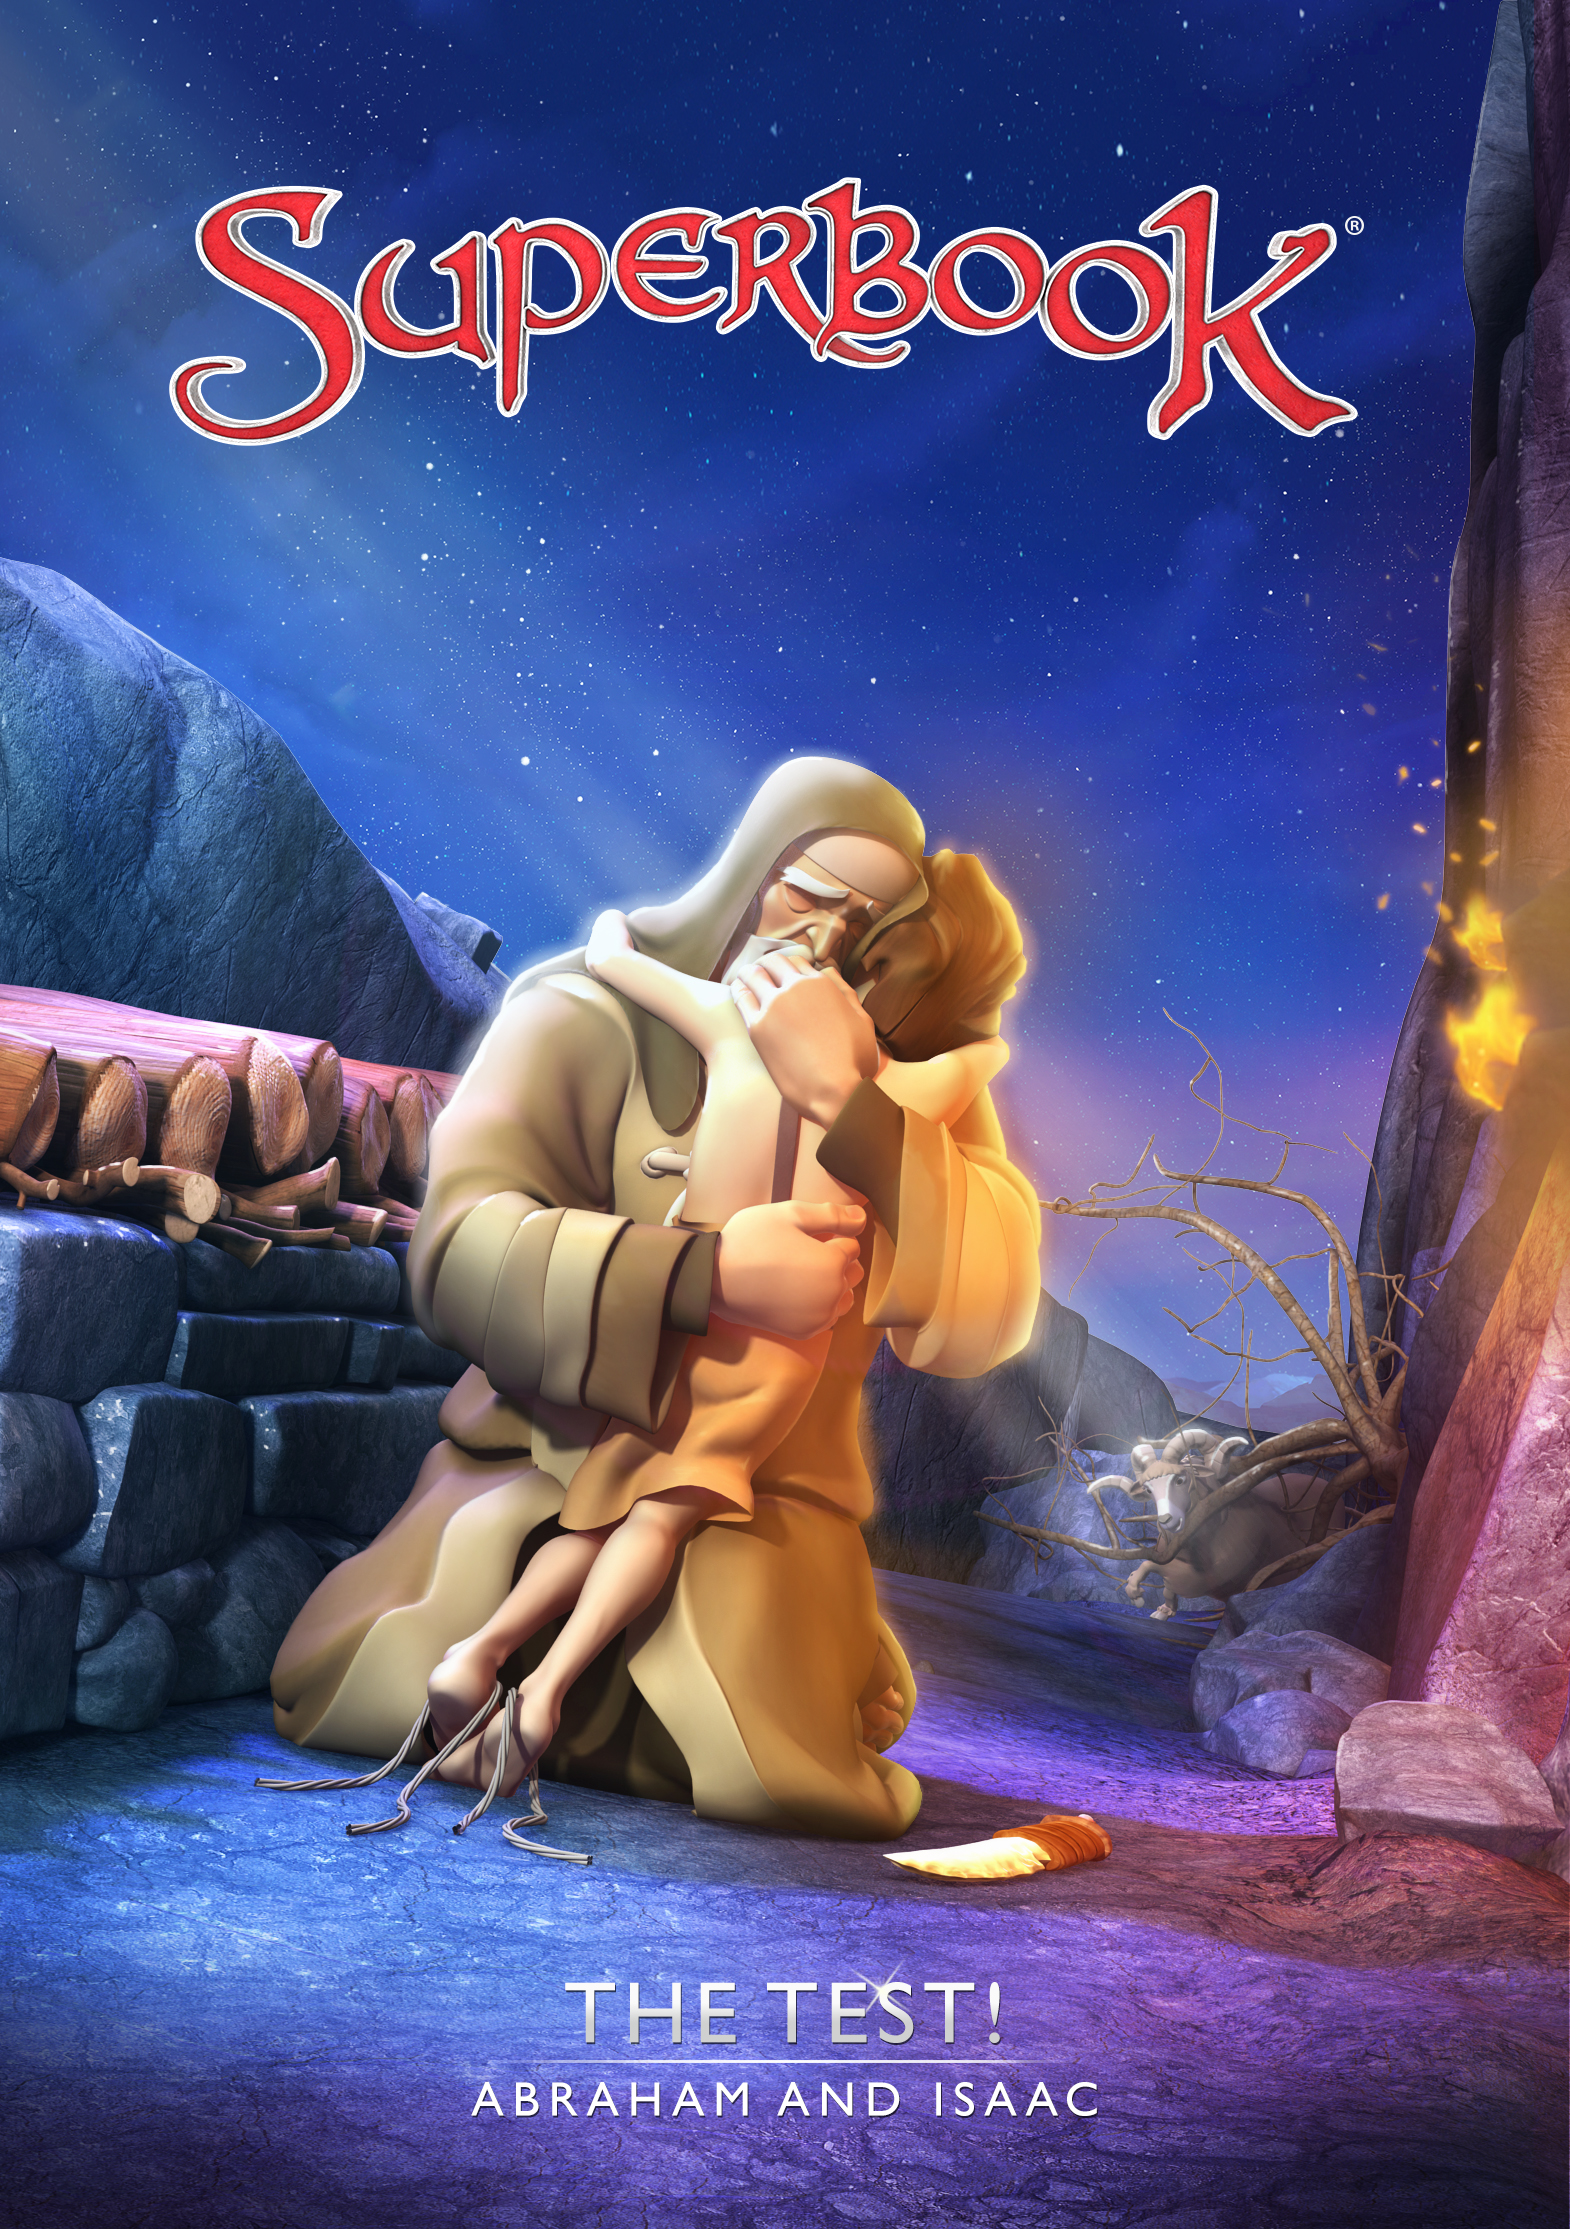 Superbook Episode 102 The Test!: Abraham And Isaac